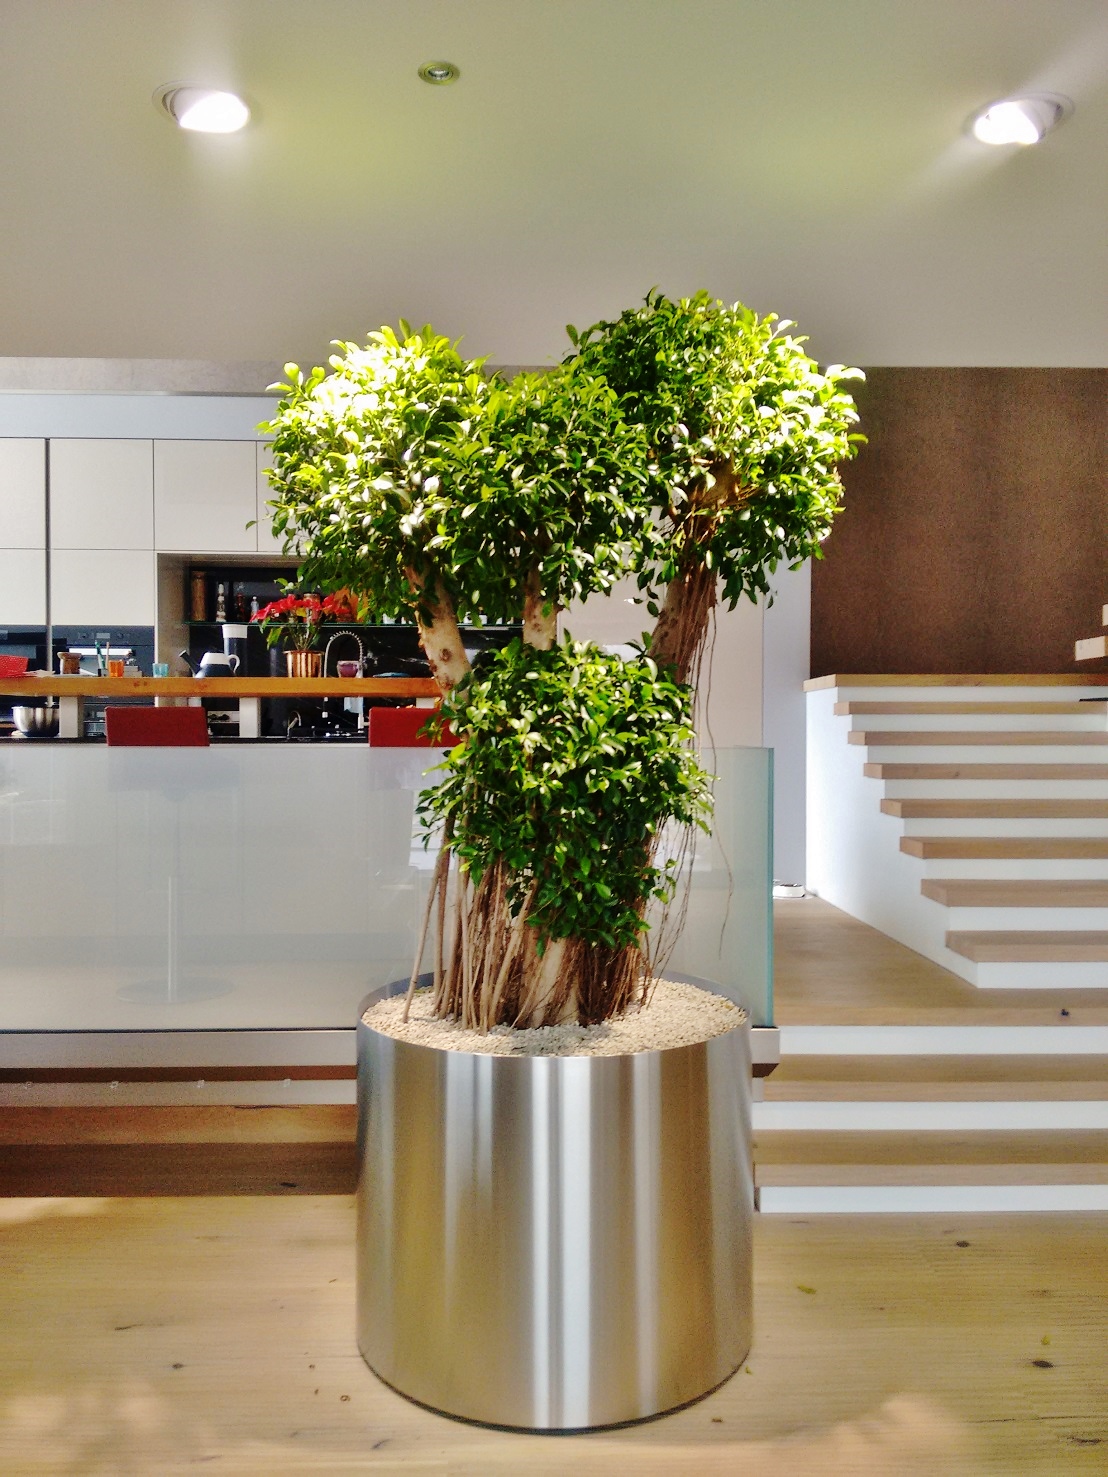 Super modern kitchen with exclusive, bonsai-like Ficus nitida plant - simply beautiful!